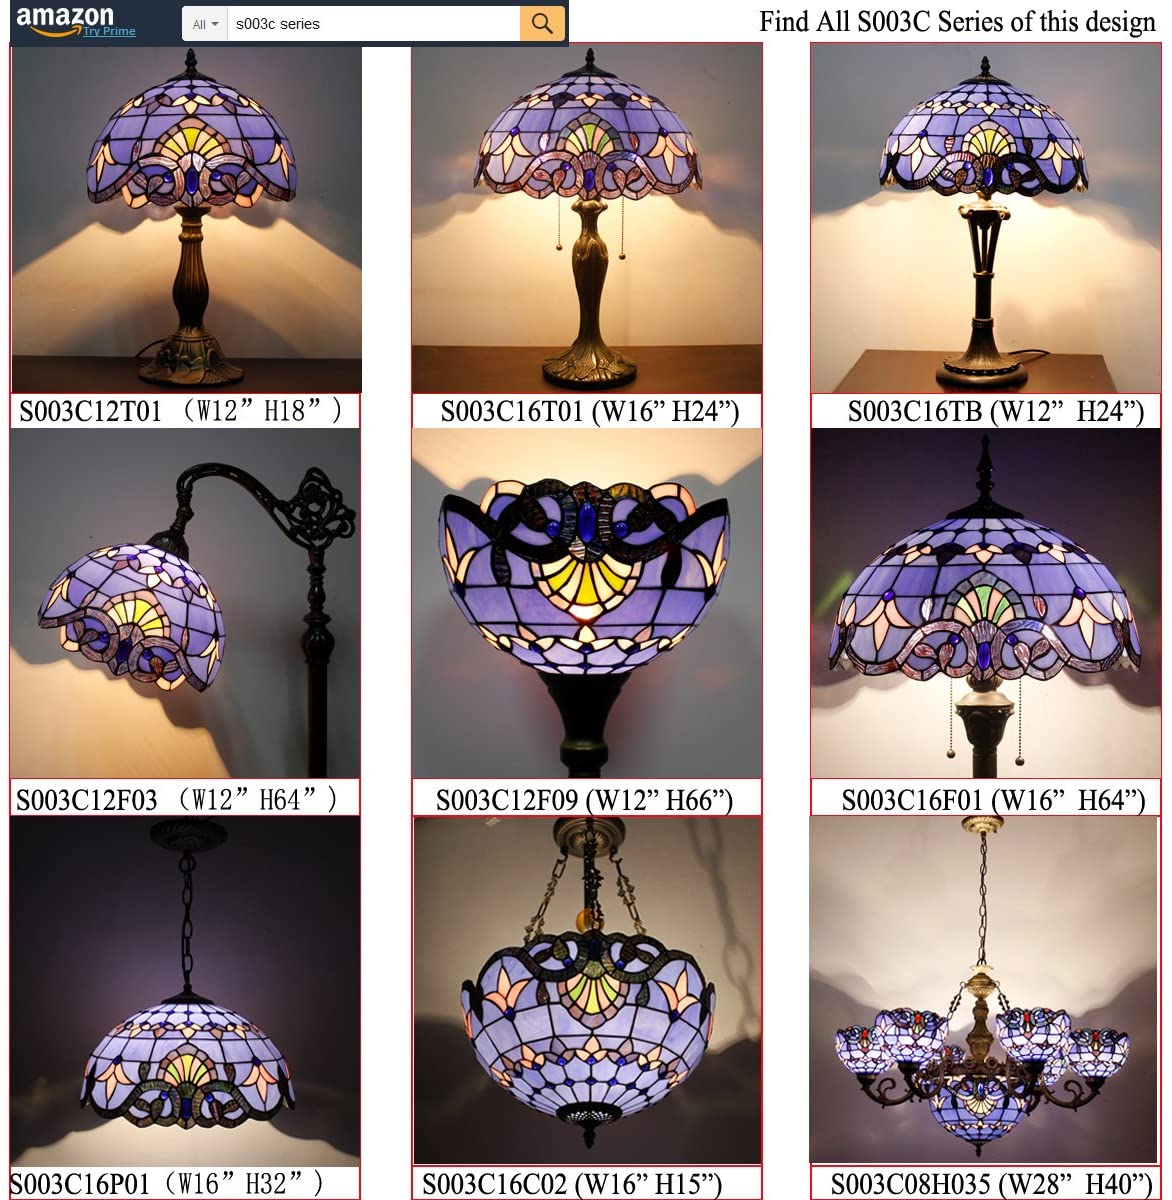 BBNBDMZ  Floor Lamp Blue Purple Baroque Stained Glass Light 12X12X66 Inch Pole Torchiere Standing Corner Torch Uplight Decor Bedroom Living Room  Office S003C Series